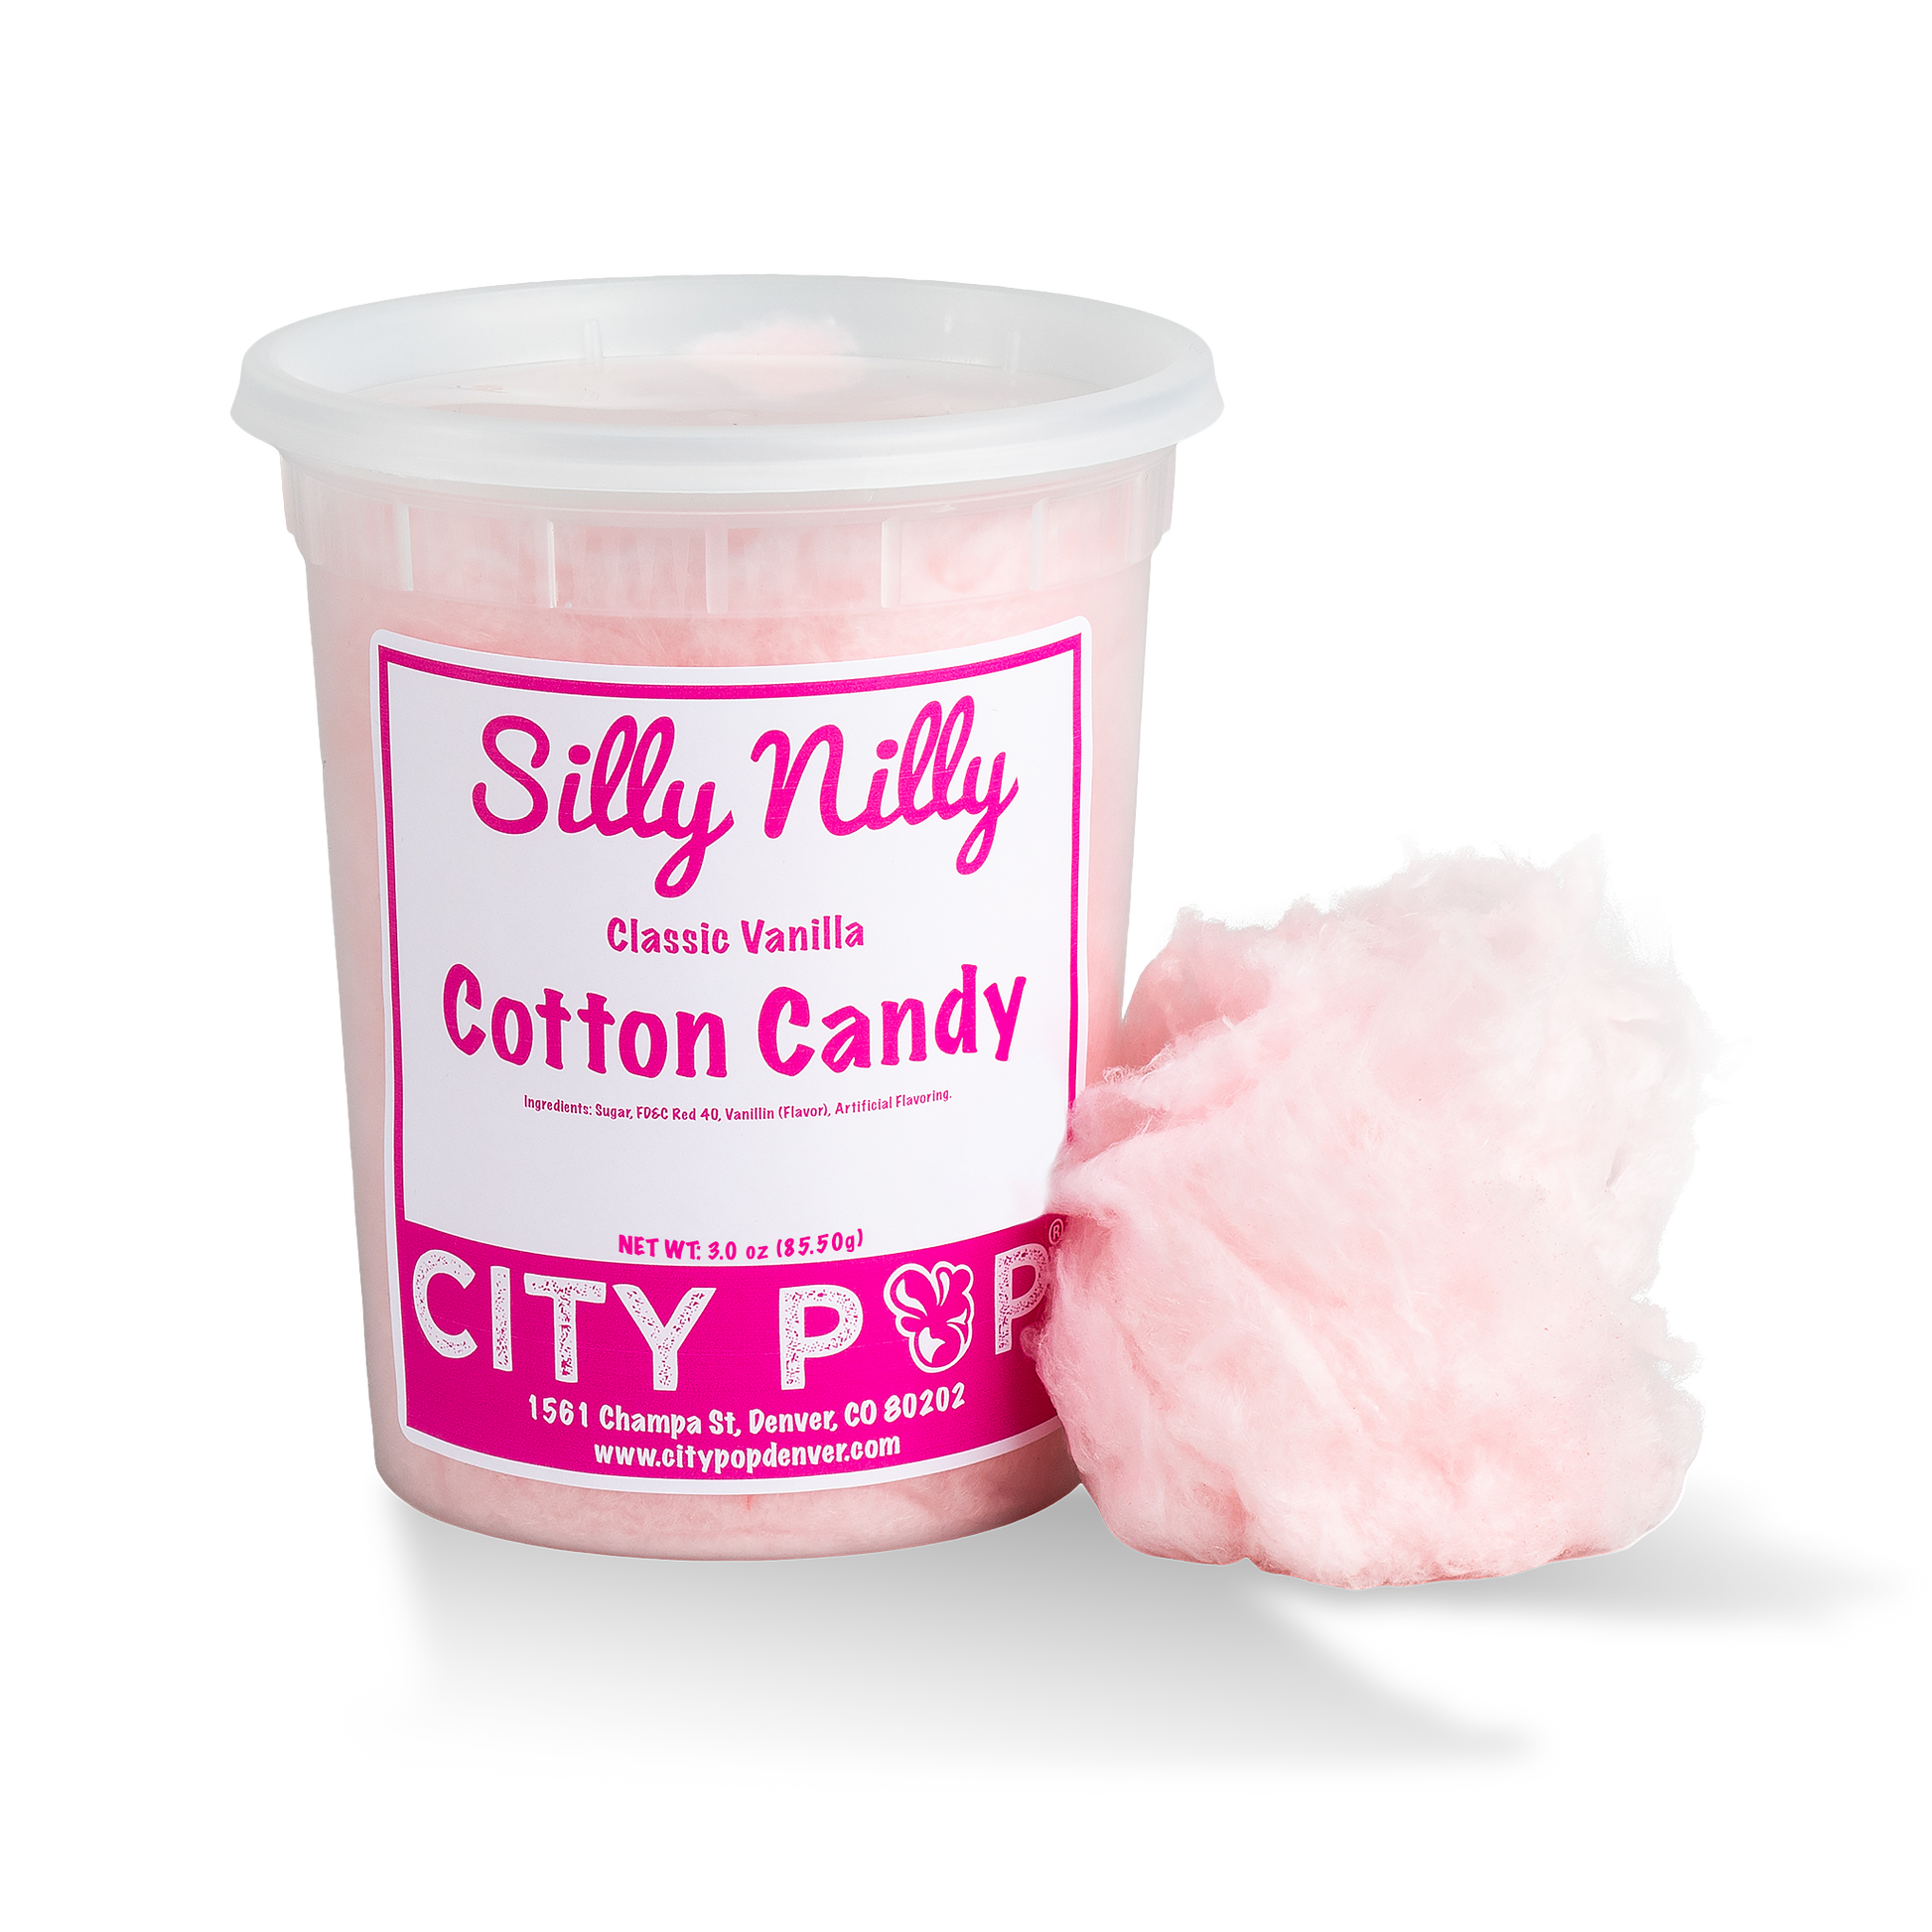 Silly Nilly Cotton Candy